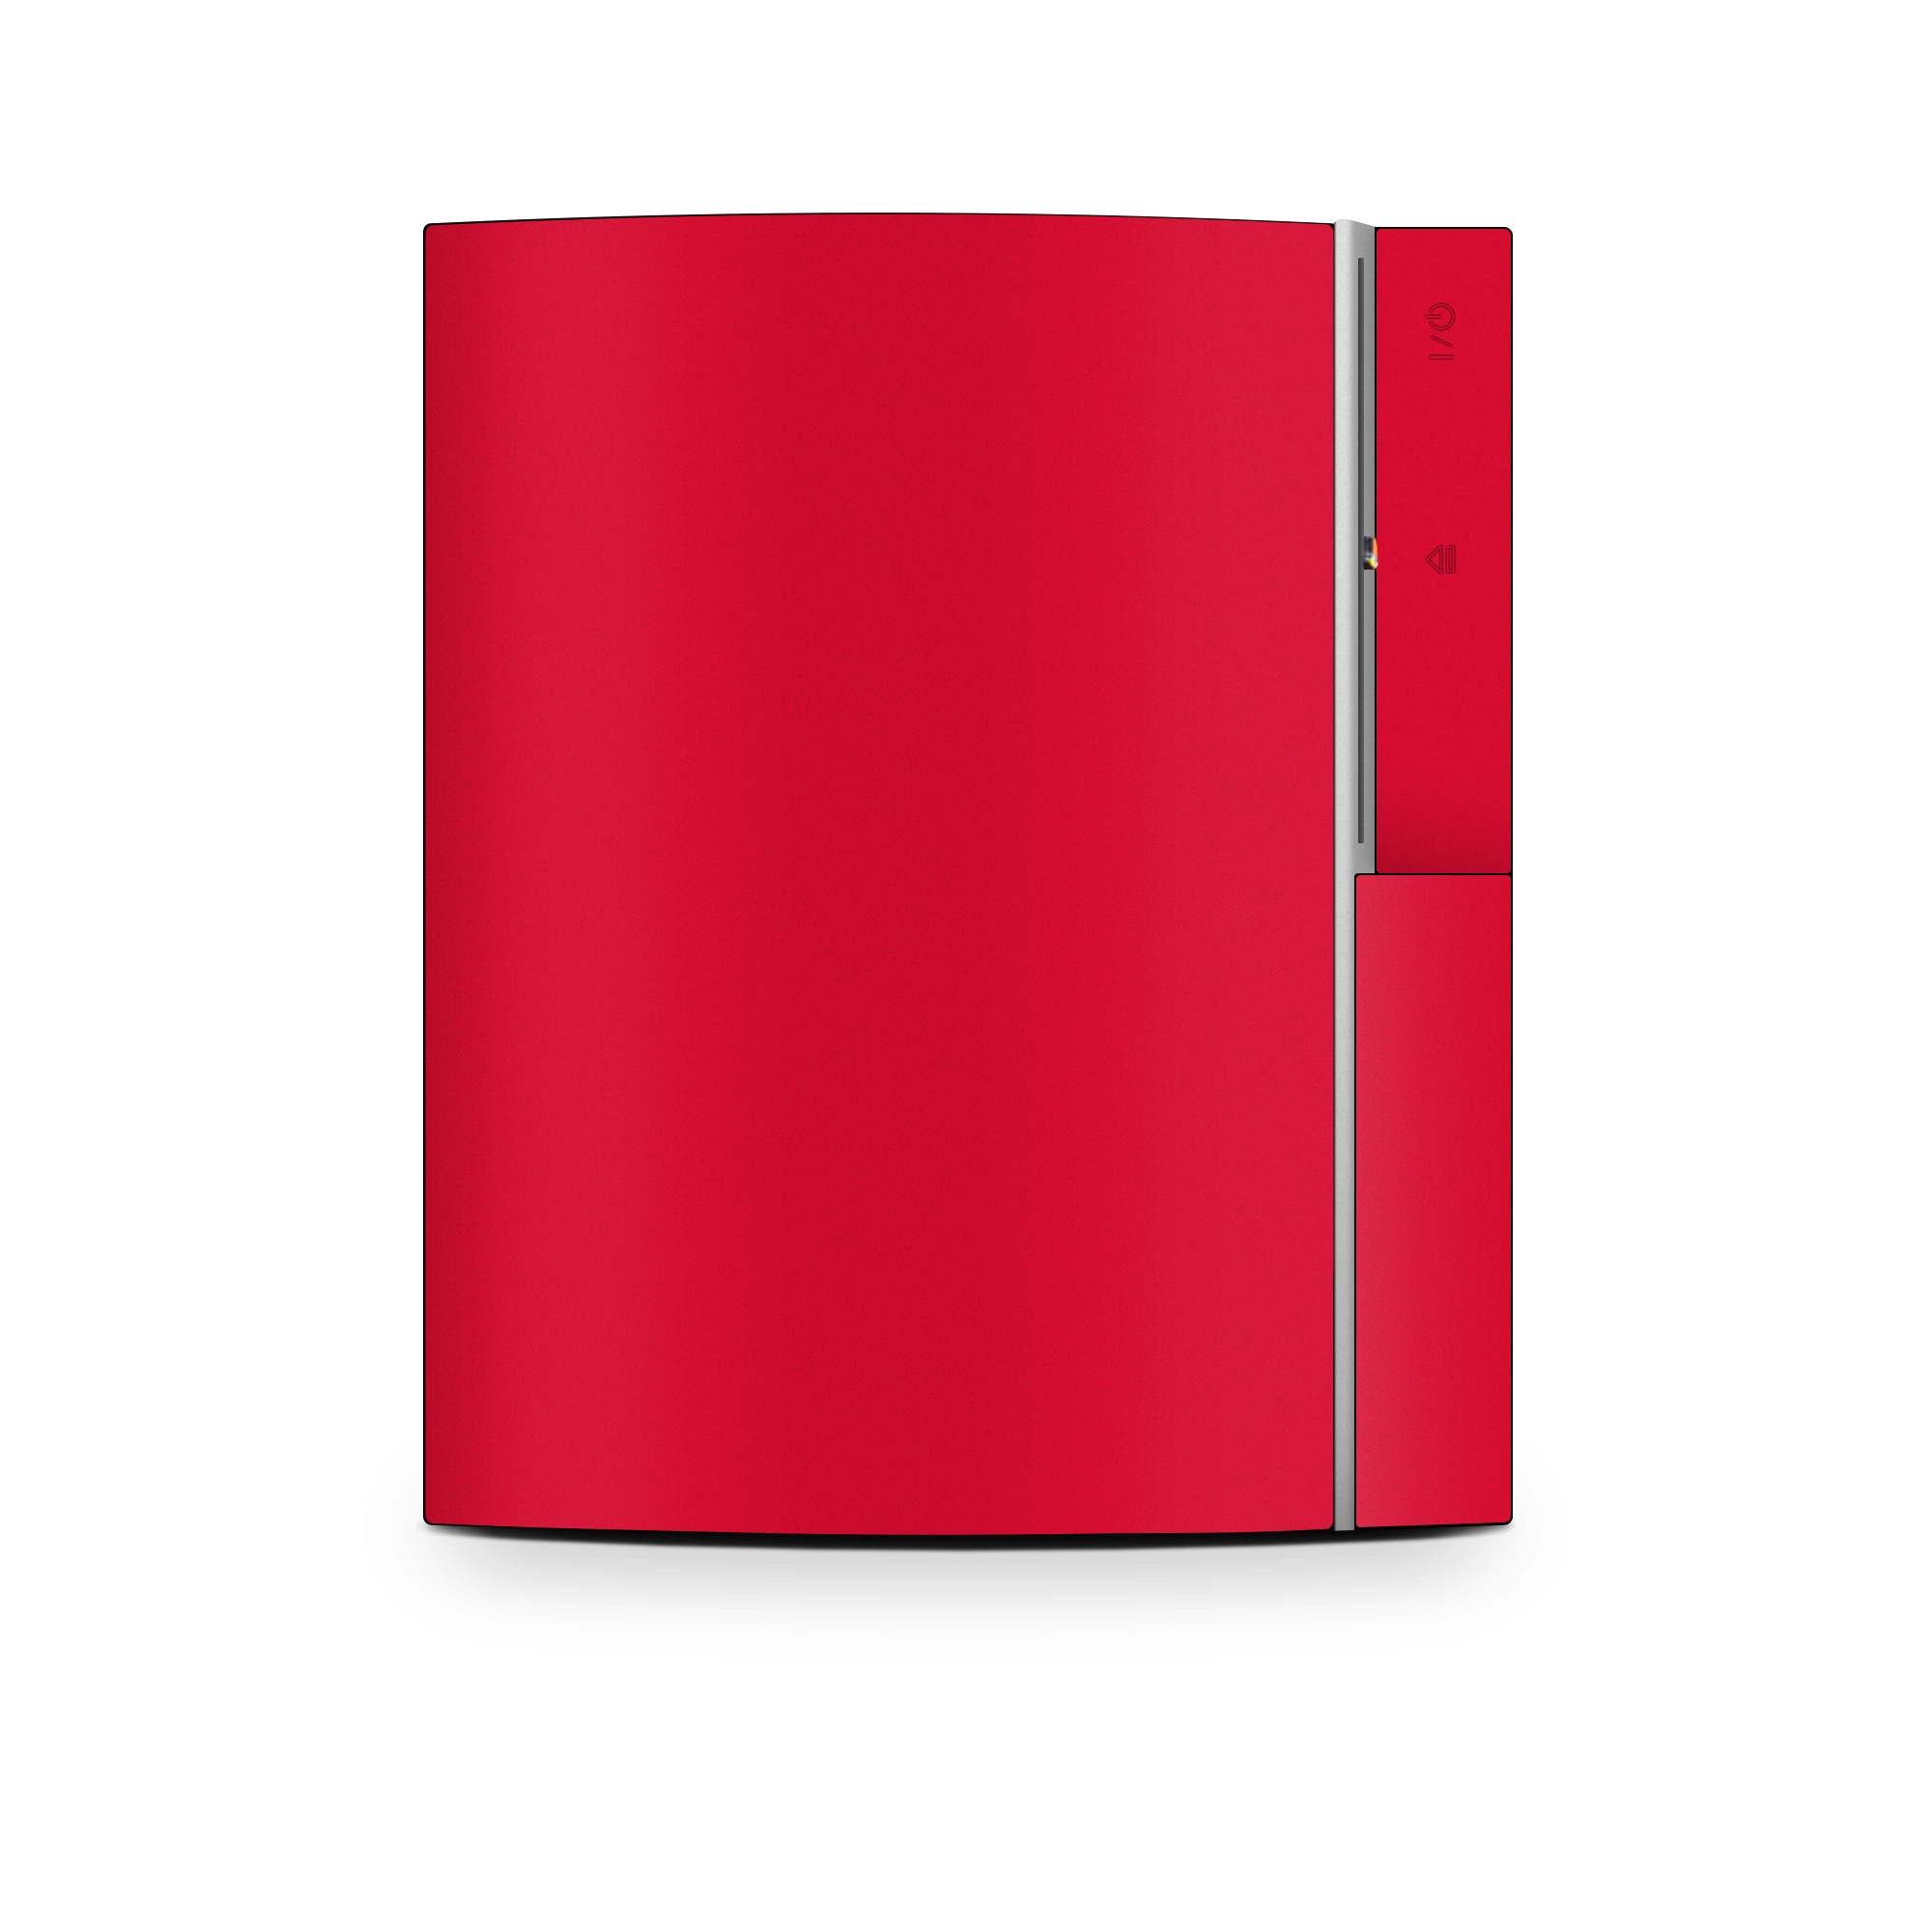 PS3 Skin - Solid State Red (Image 1)